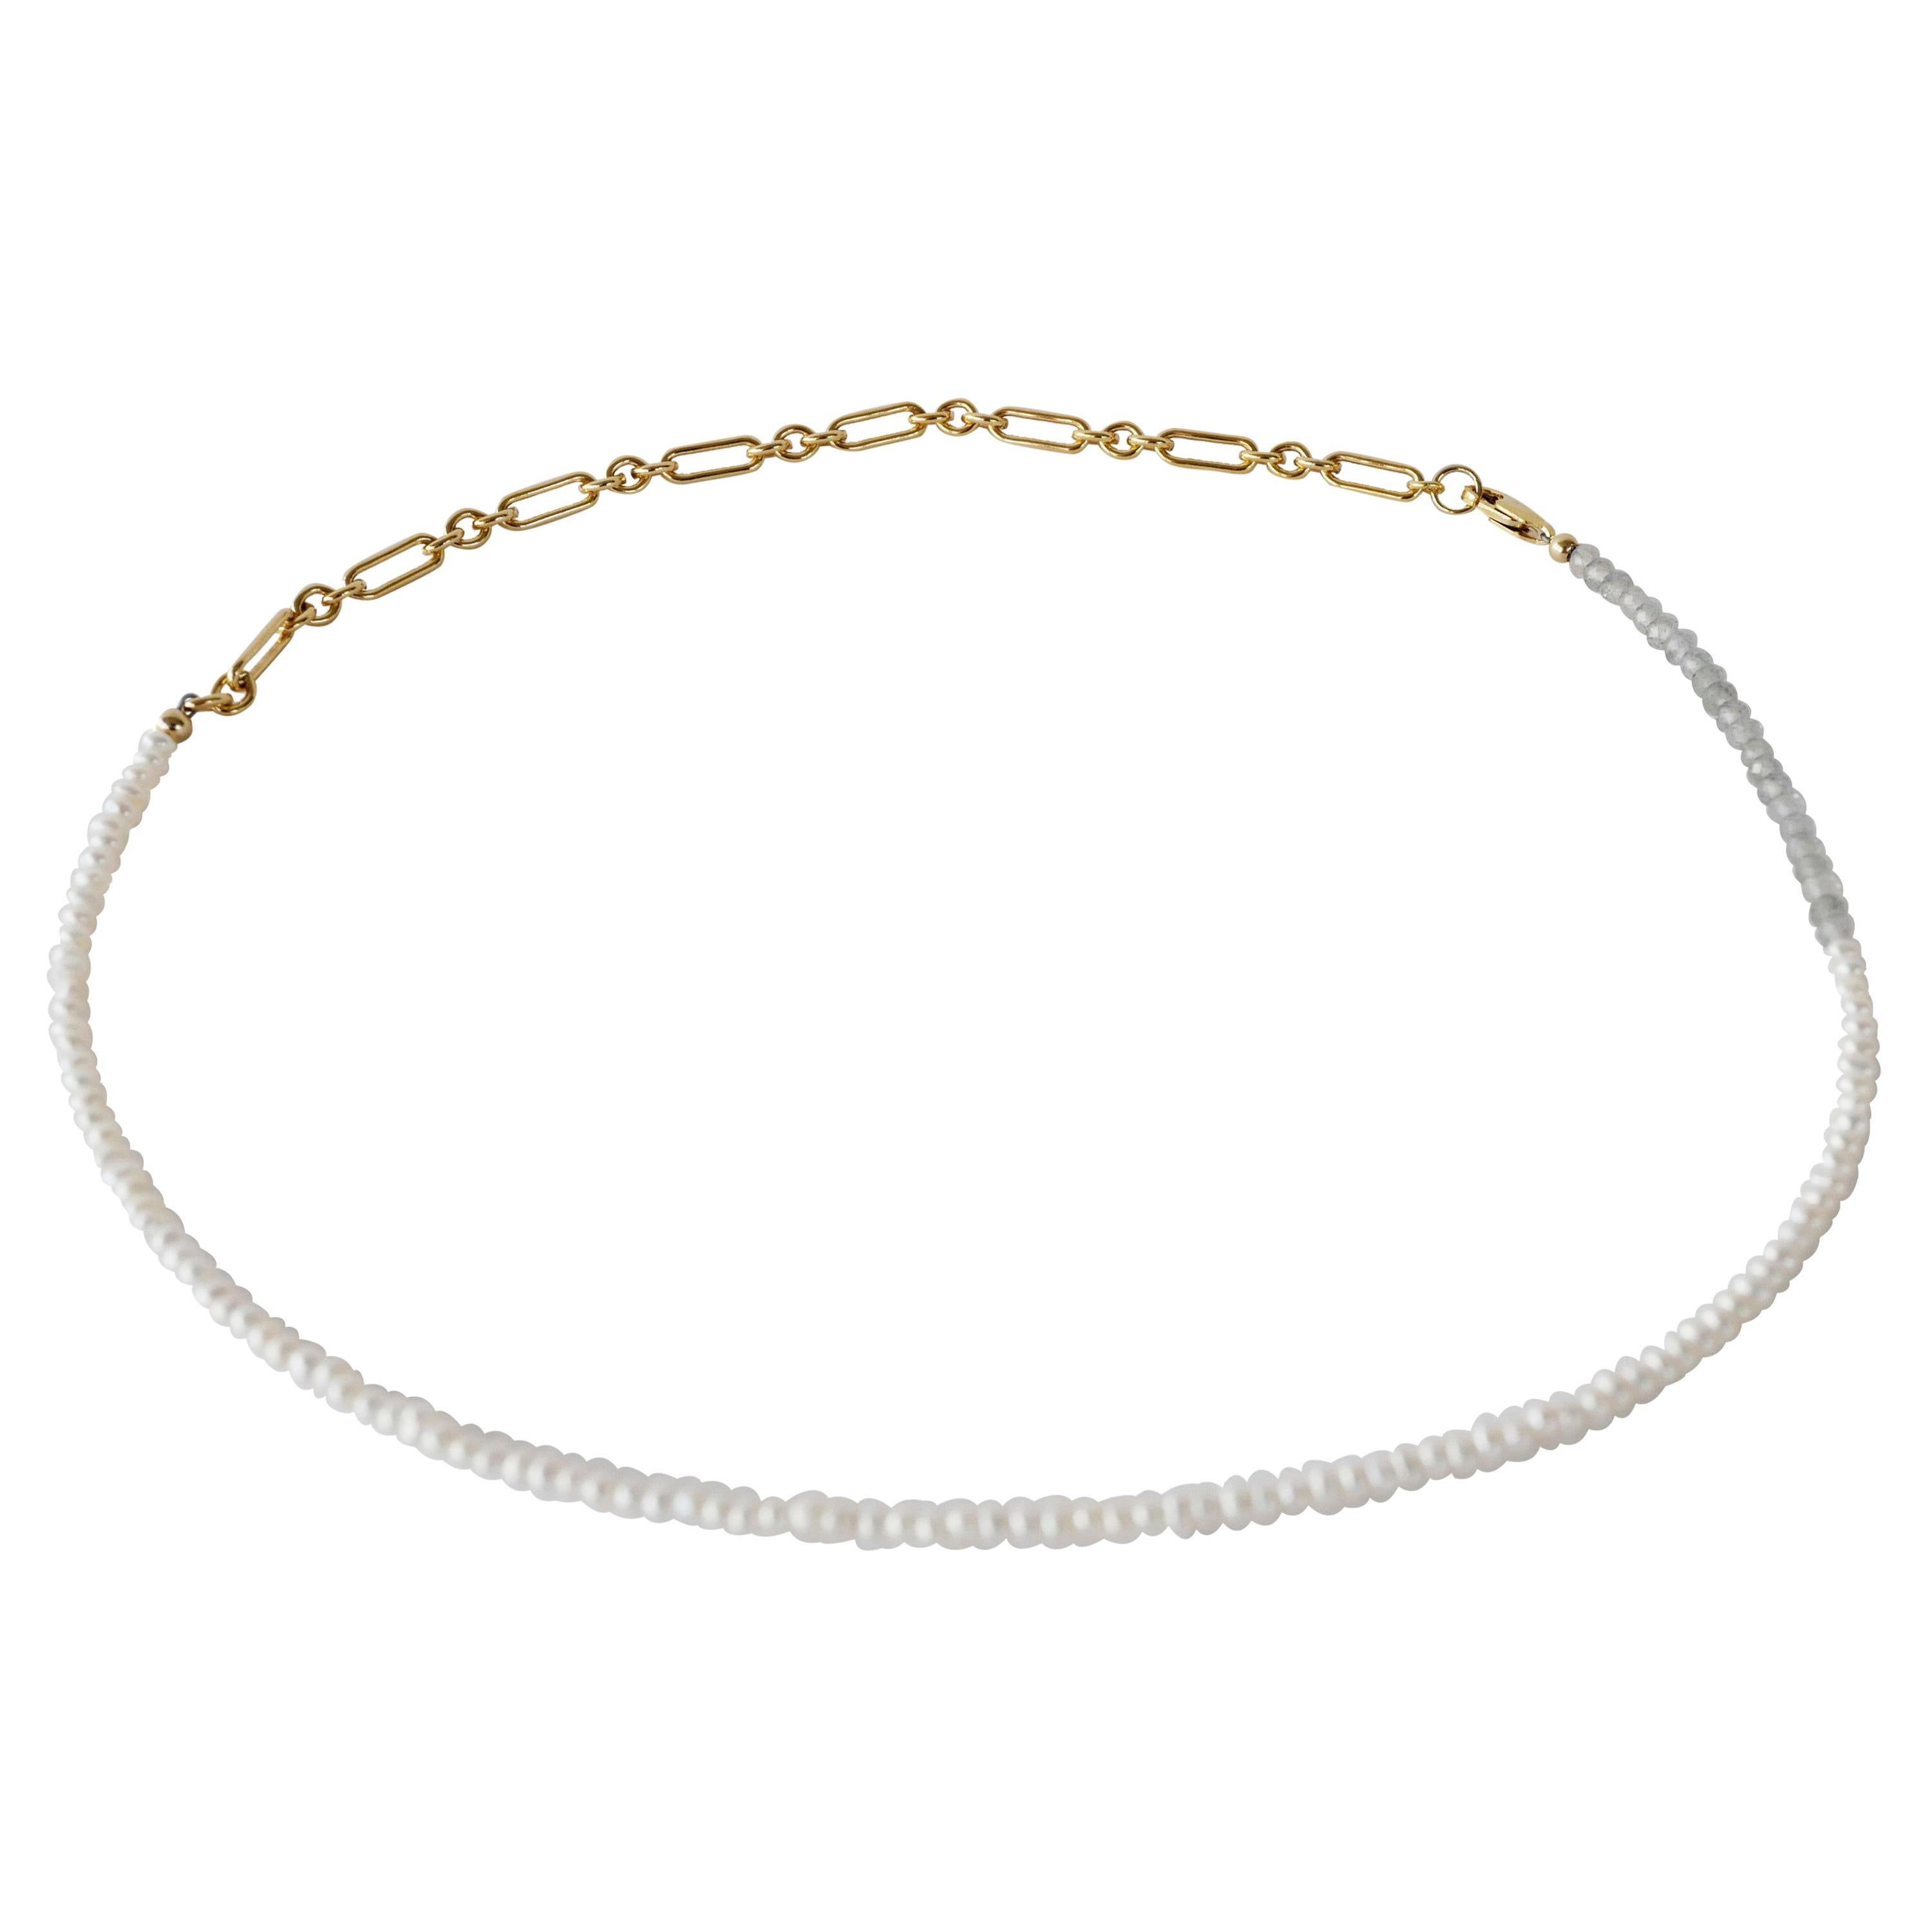 White Pearl Necklace labradorite Gold Tone Chain Beaded Choker J Dauphin For Sale